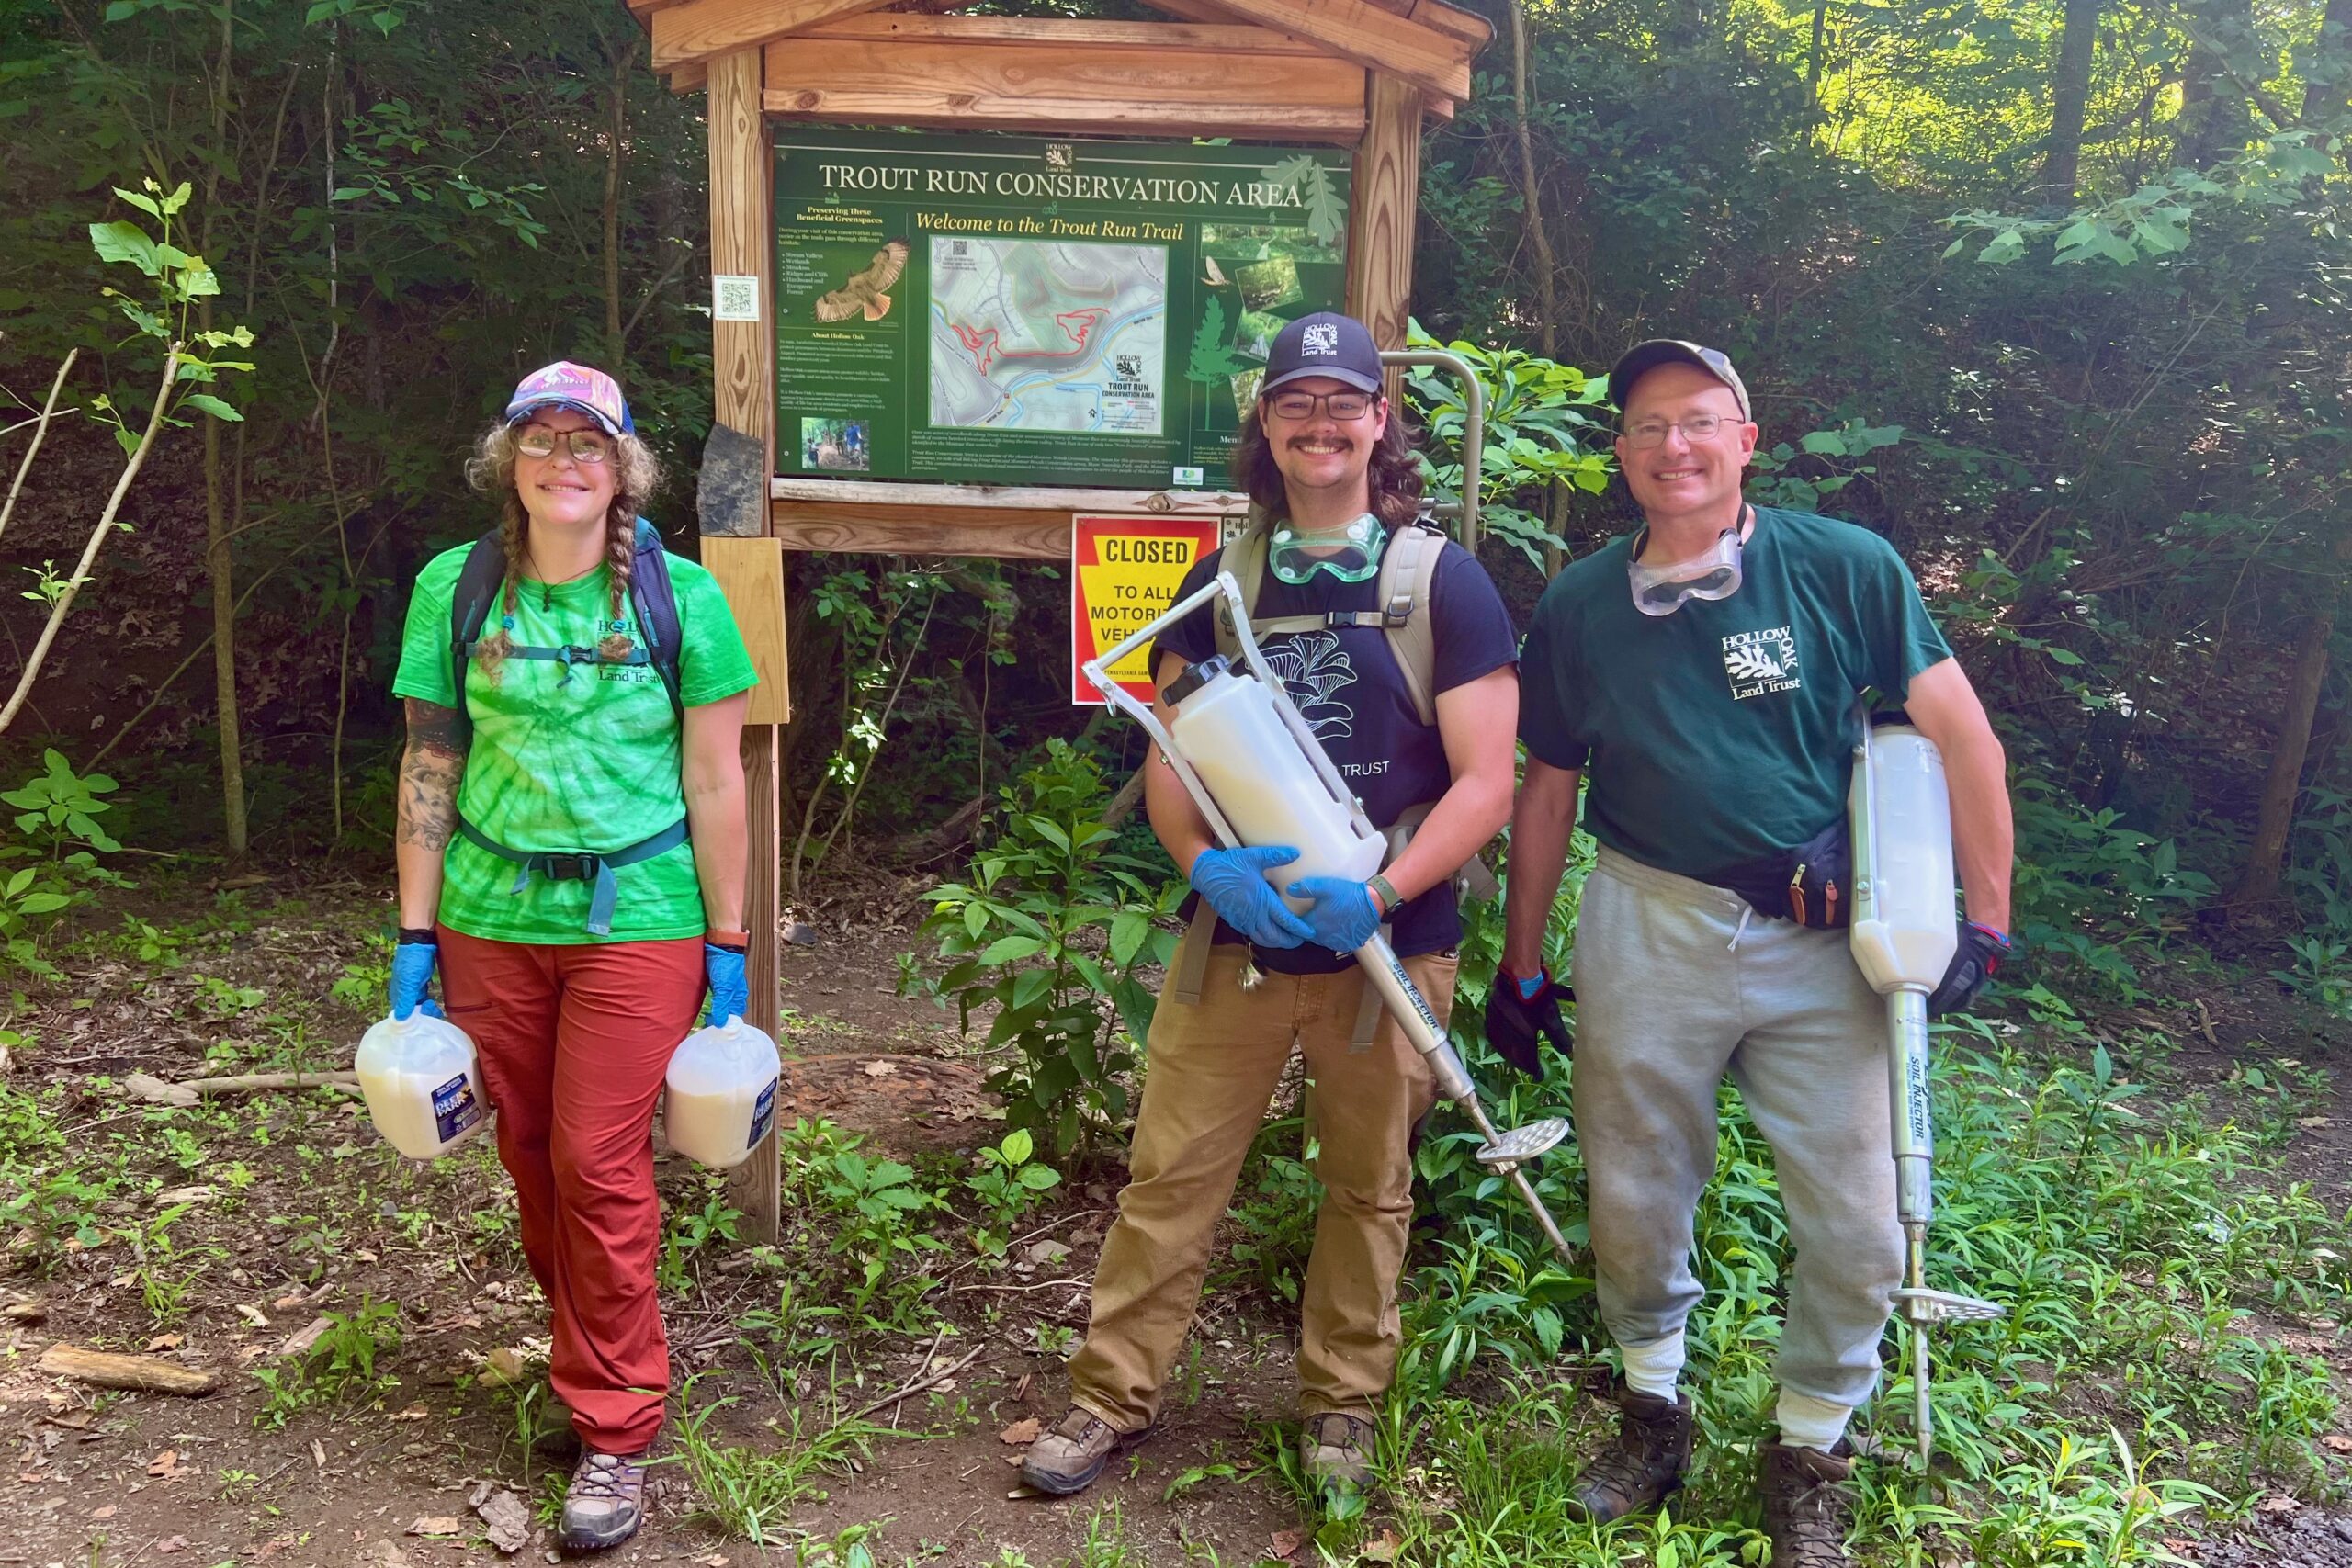 Three Hollow Oak Land Trust workers stand in front of a sign that says, "Trout Run Conservation Area." They are wearing backpacks and equipment, while carrying jugs and soil injectors of treatment. They are surrounded by wooded scenery.